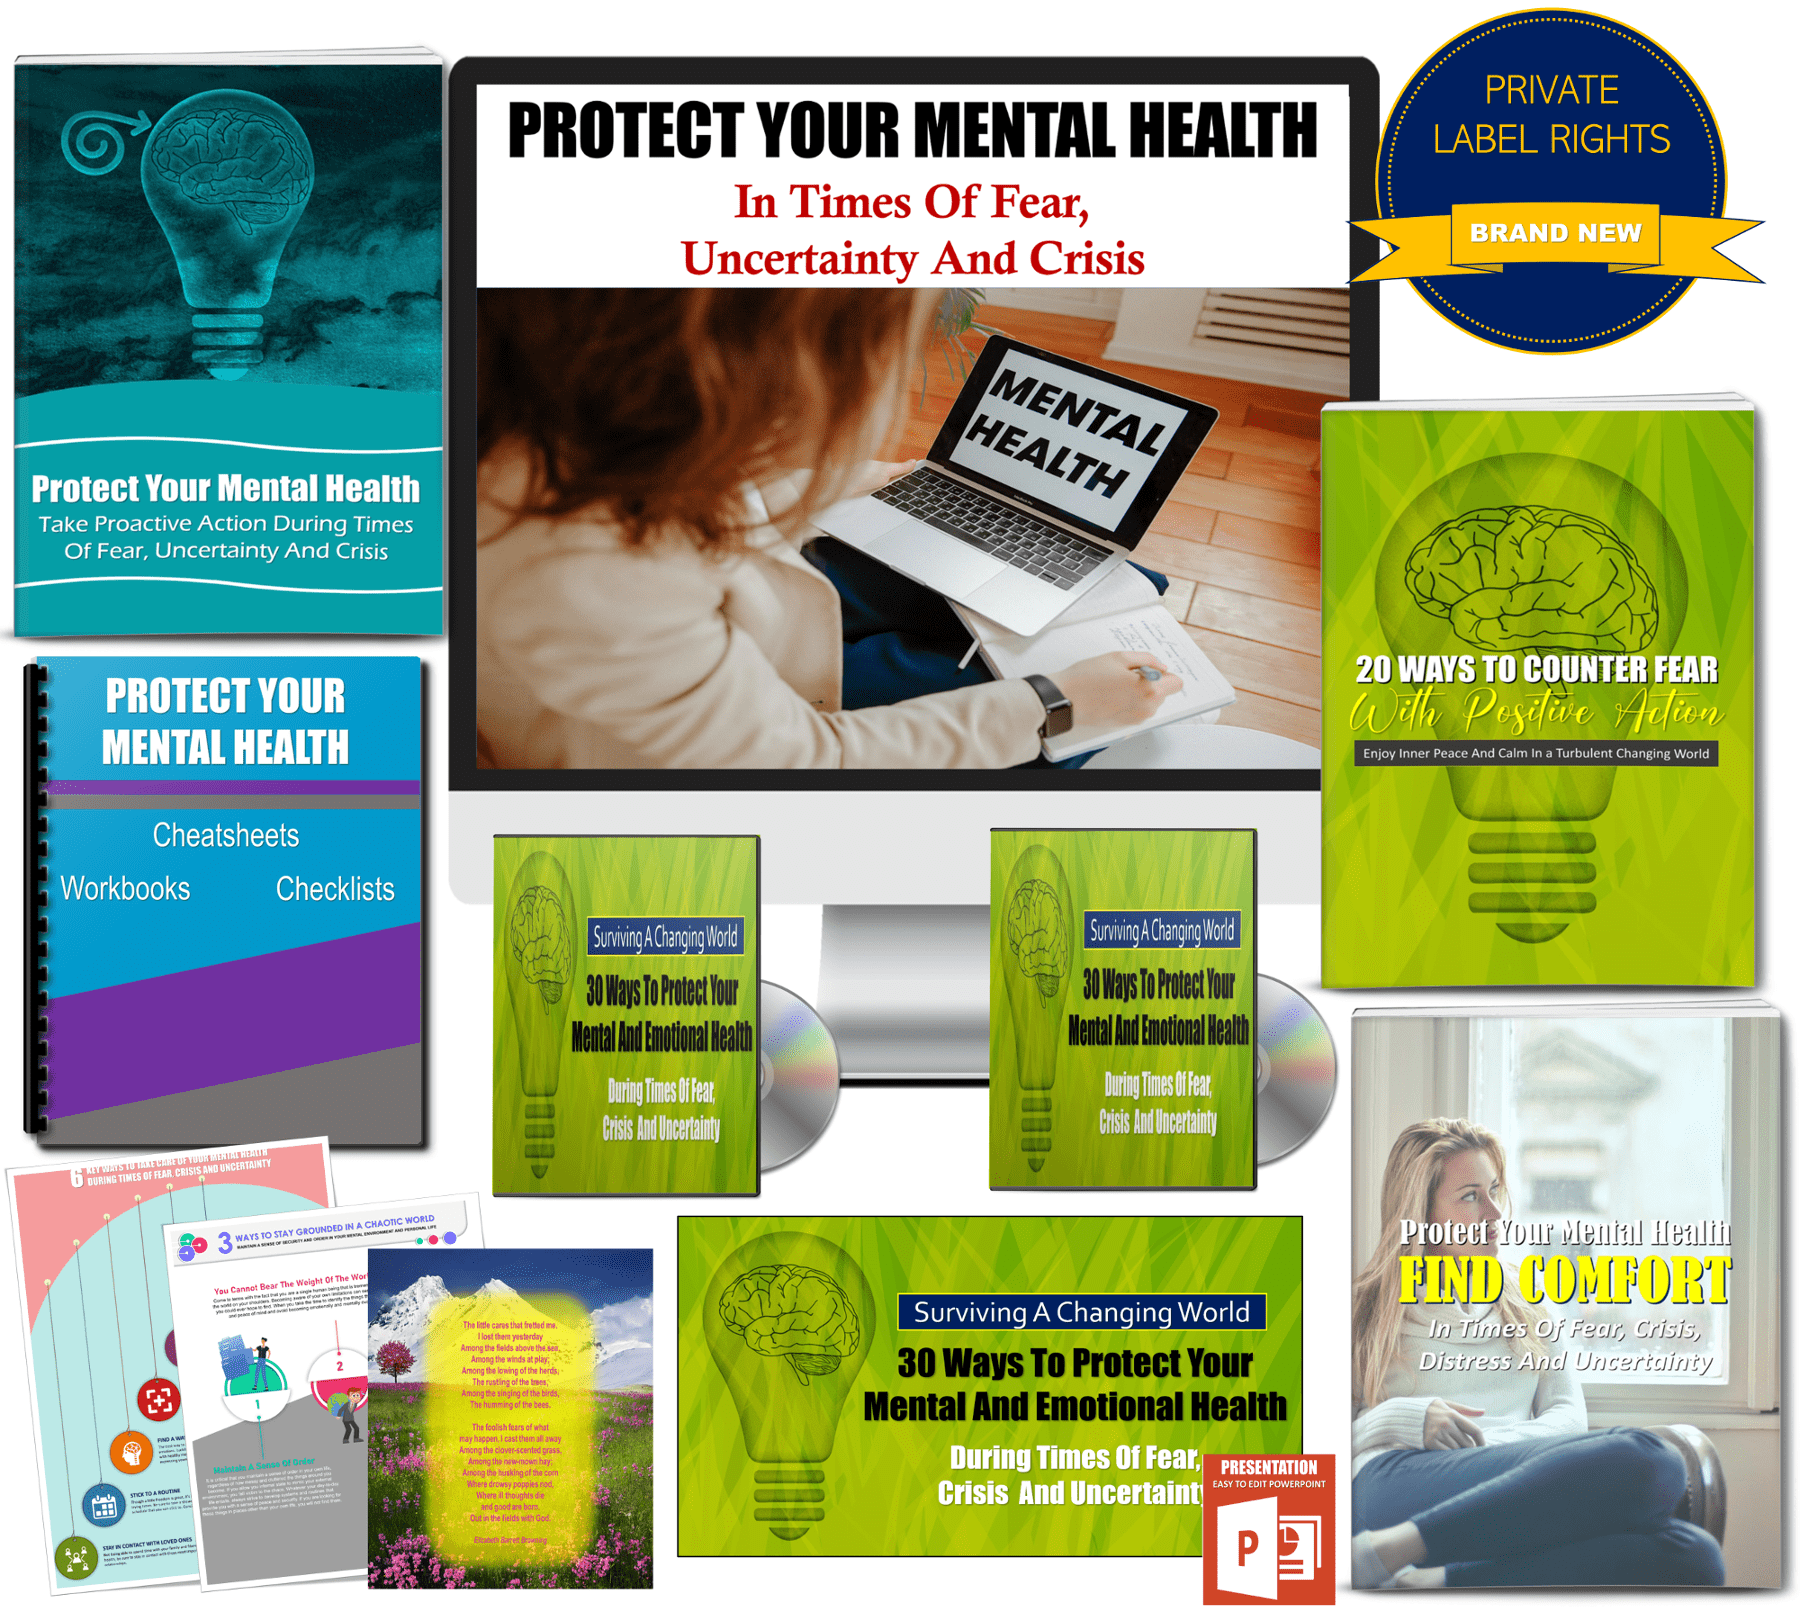 Survive A Changing World: Protect Your Mental Health In Times Of Fear, Crisis And Uncertainty Content With PLR Rights